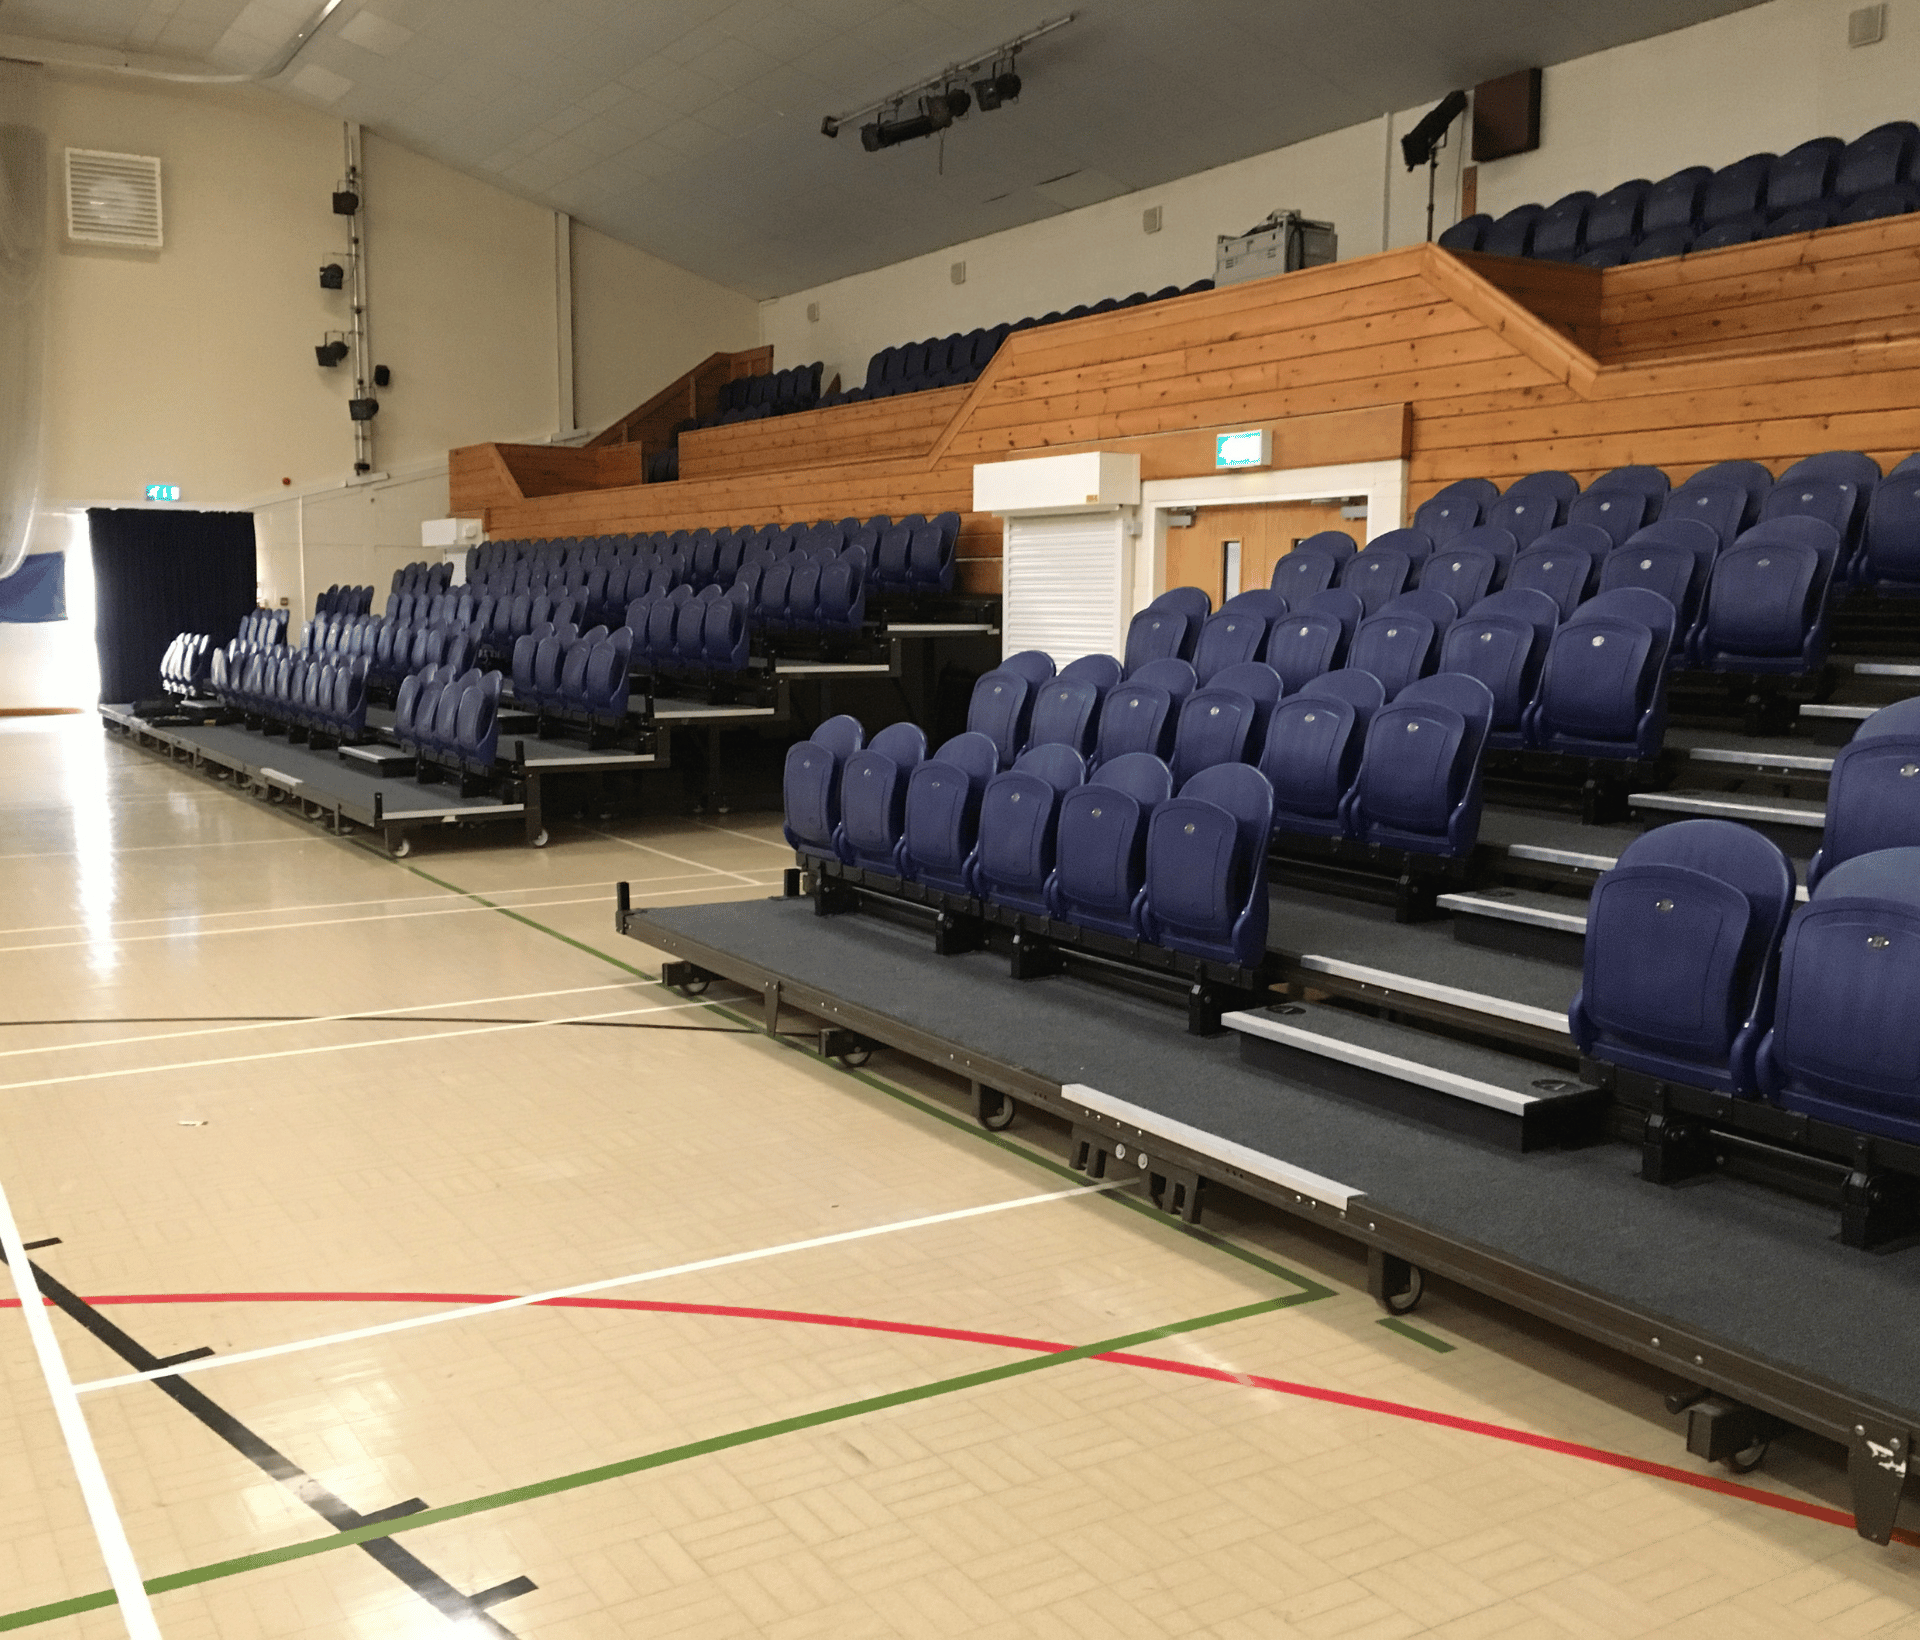 A large auditorium with rows of tiered seating